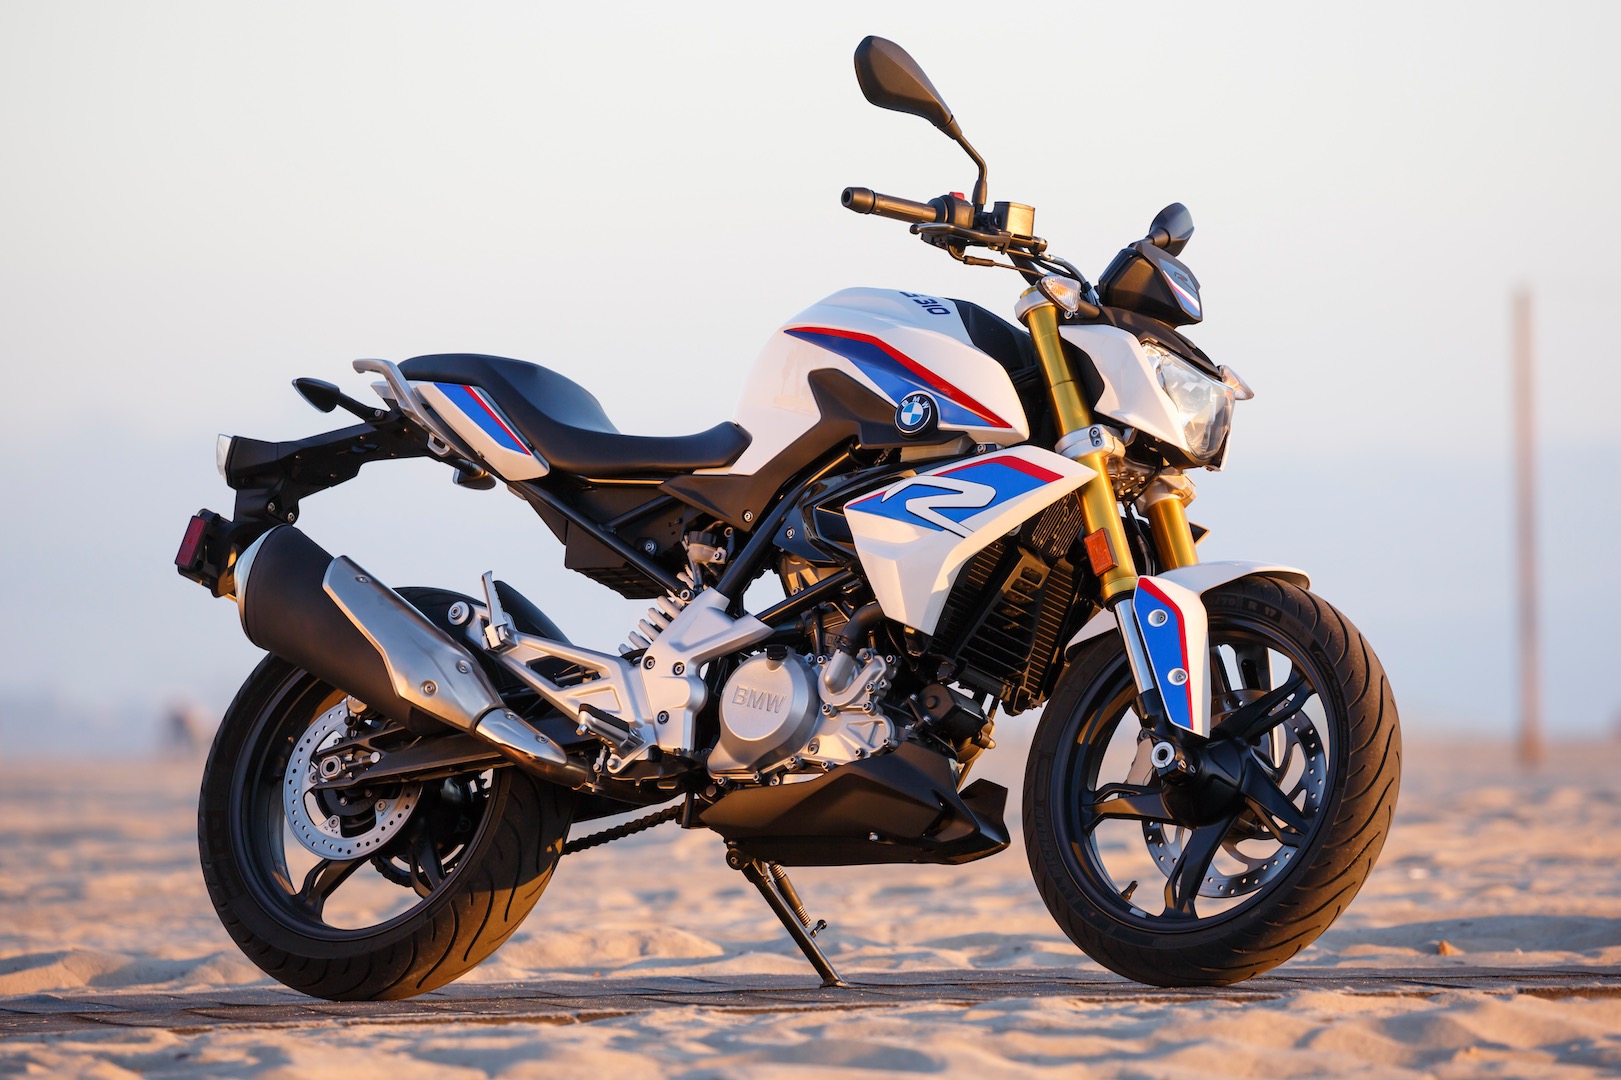 BMW levels up with its one of a kind G310R